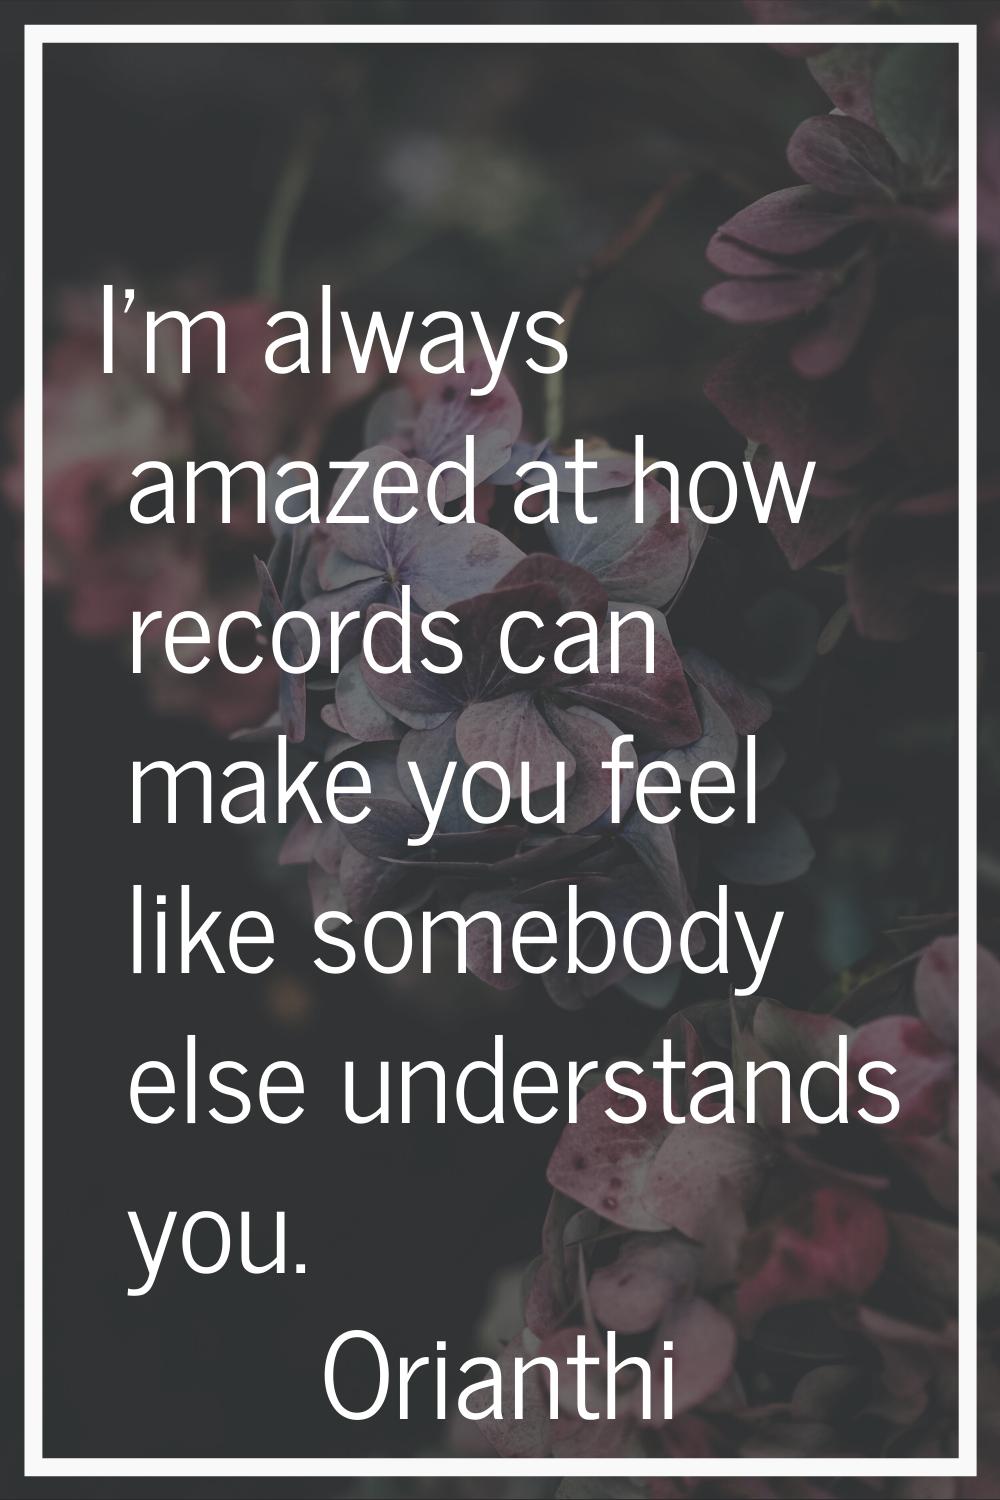 I'm always amazed at how records can make you feel like somebody else understands you.